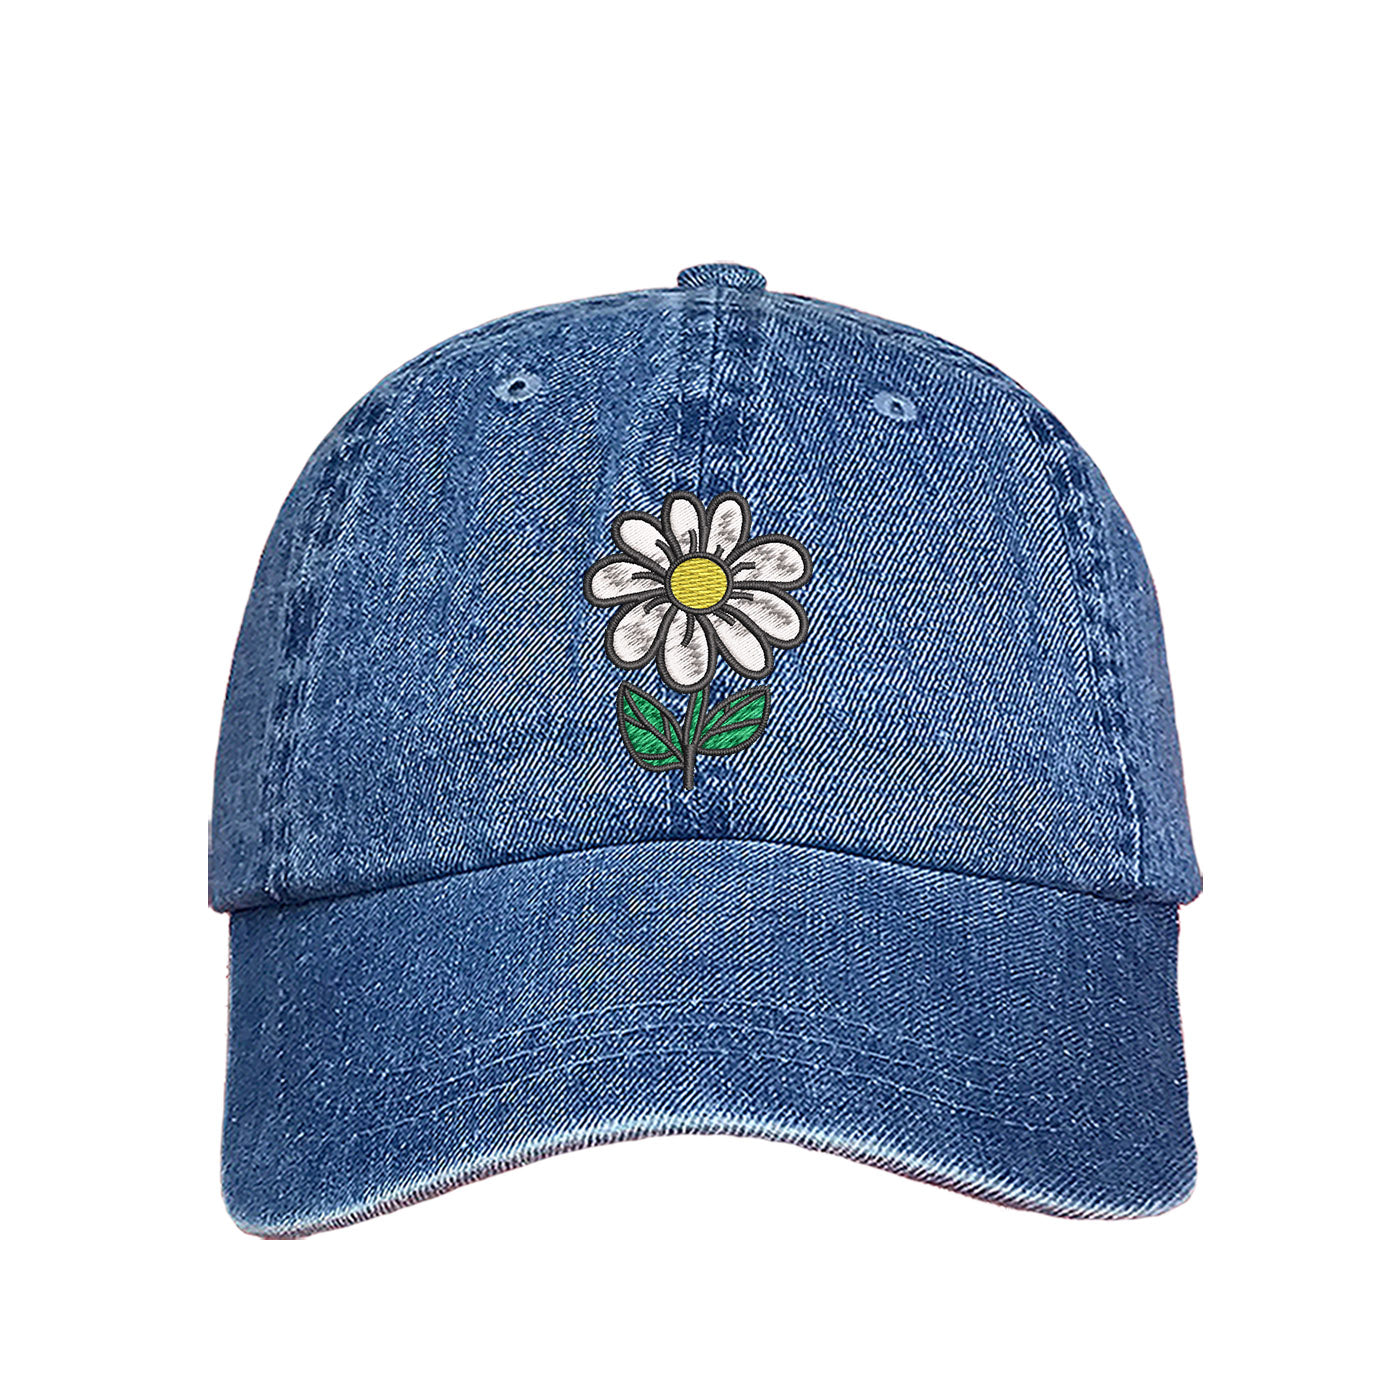 Lt Denim Baseball Cap embroidered with a daisy flower with stem - DSY Lifestyle